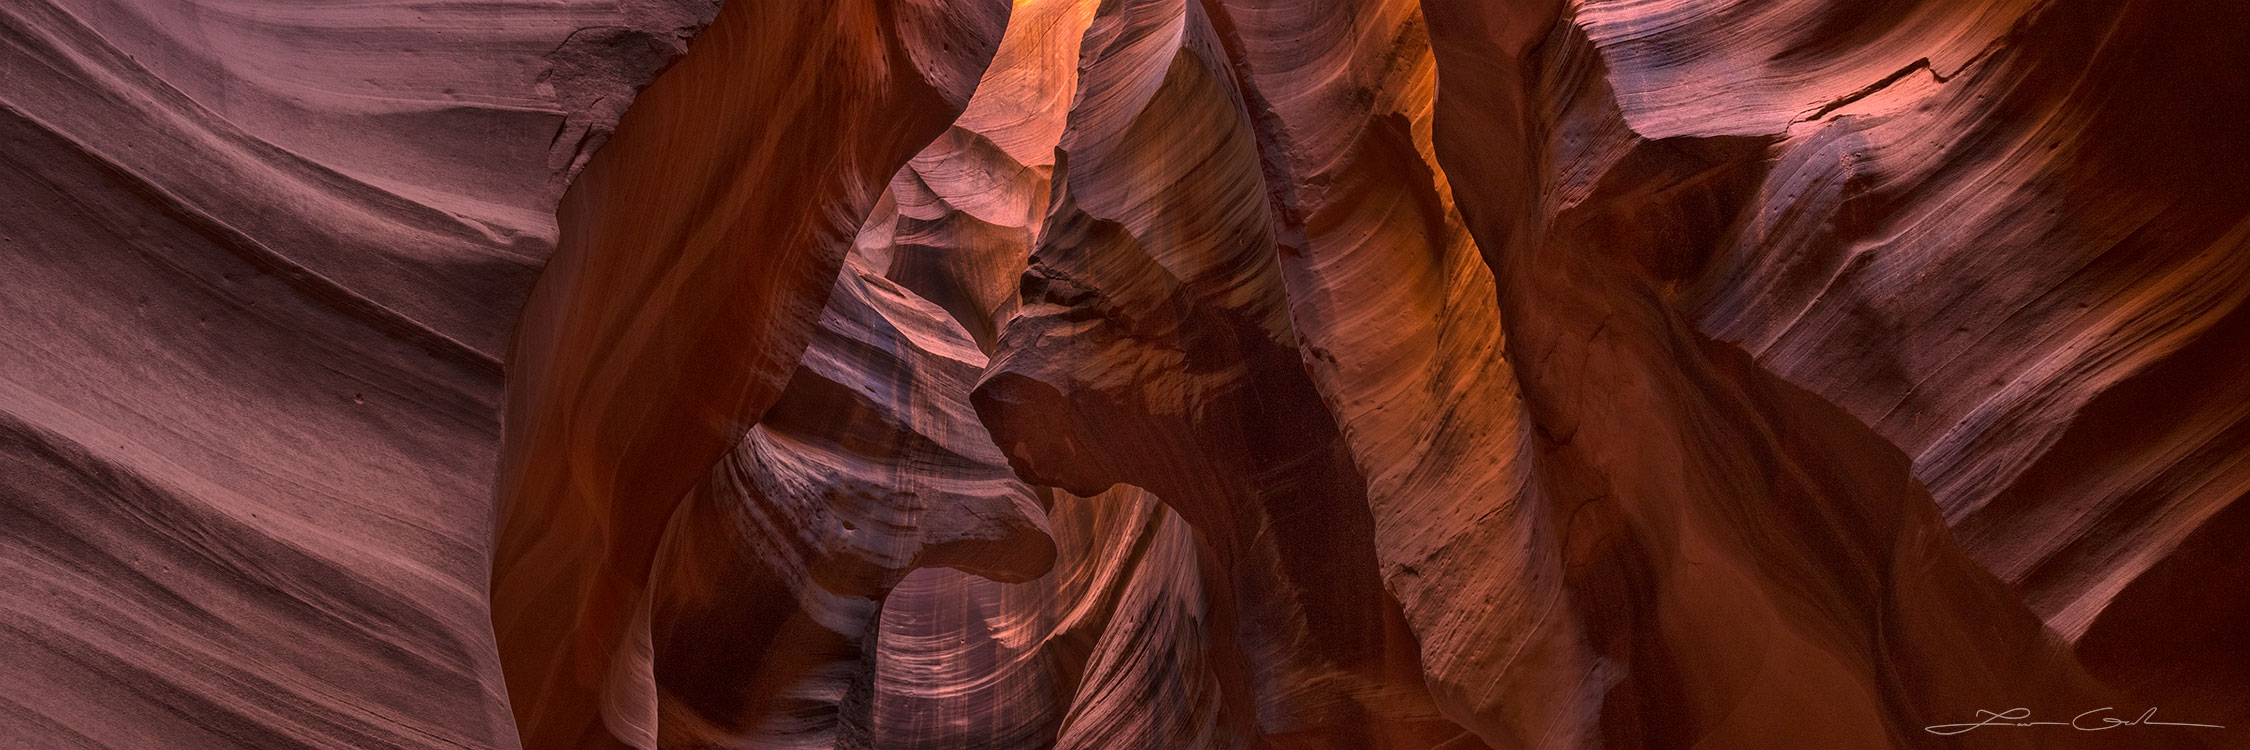 A natural cathedral of red sandstone inside Antelope Canyon, Arizona - Panoramic